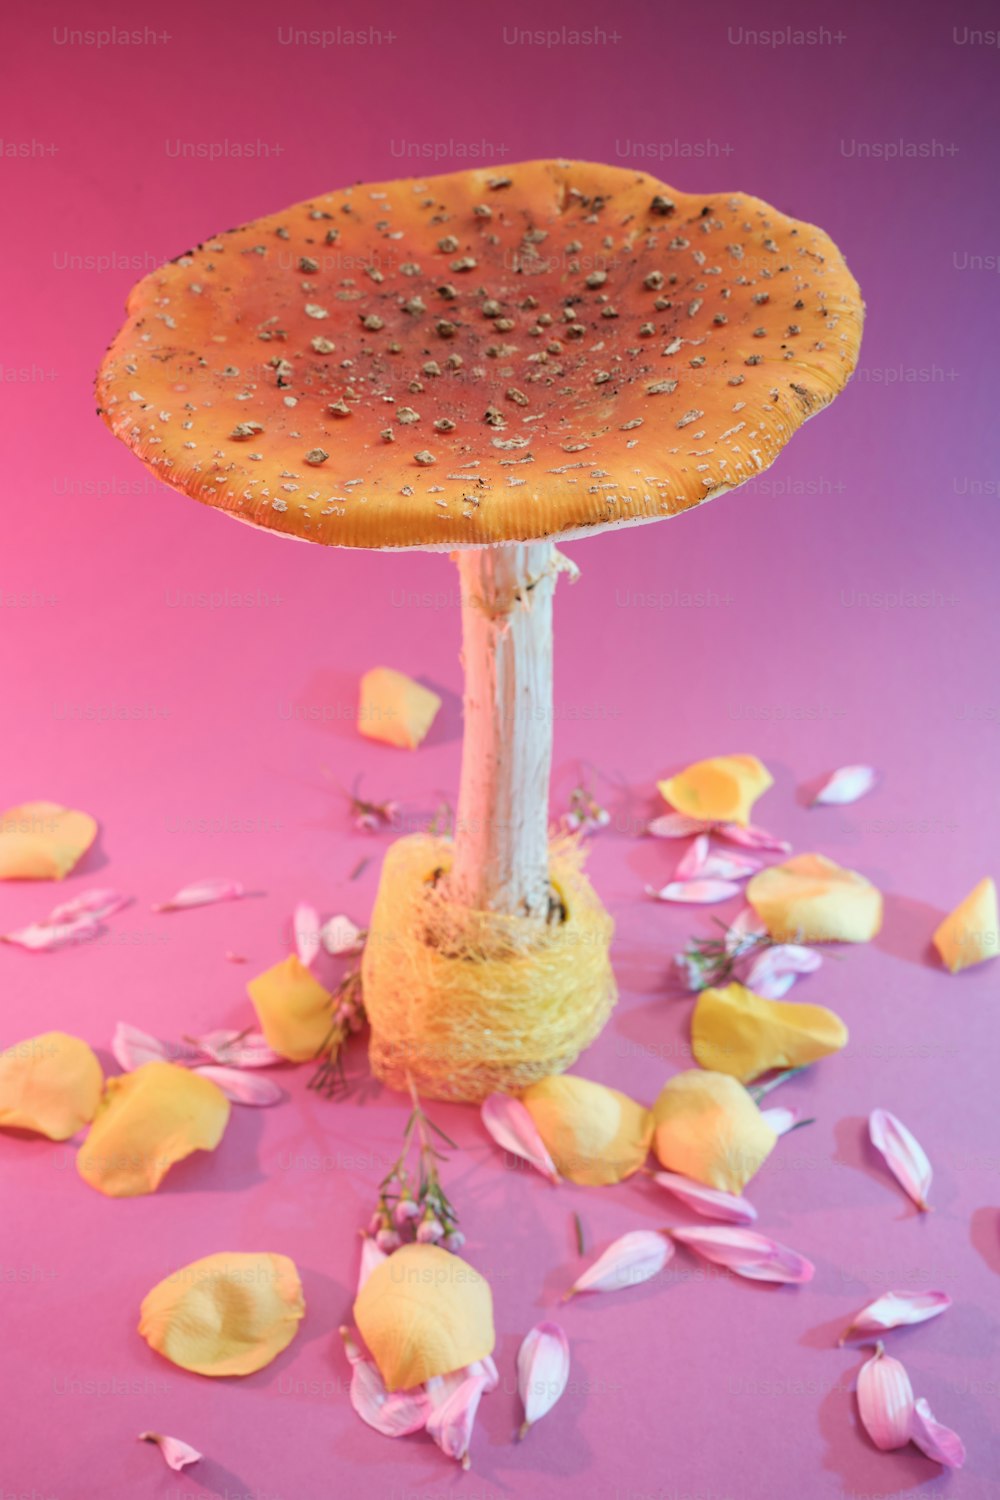 a mushroom shaped object sitting on top of a pink surface